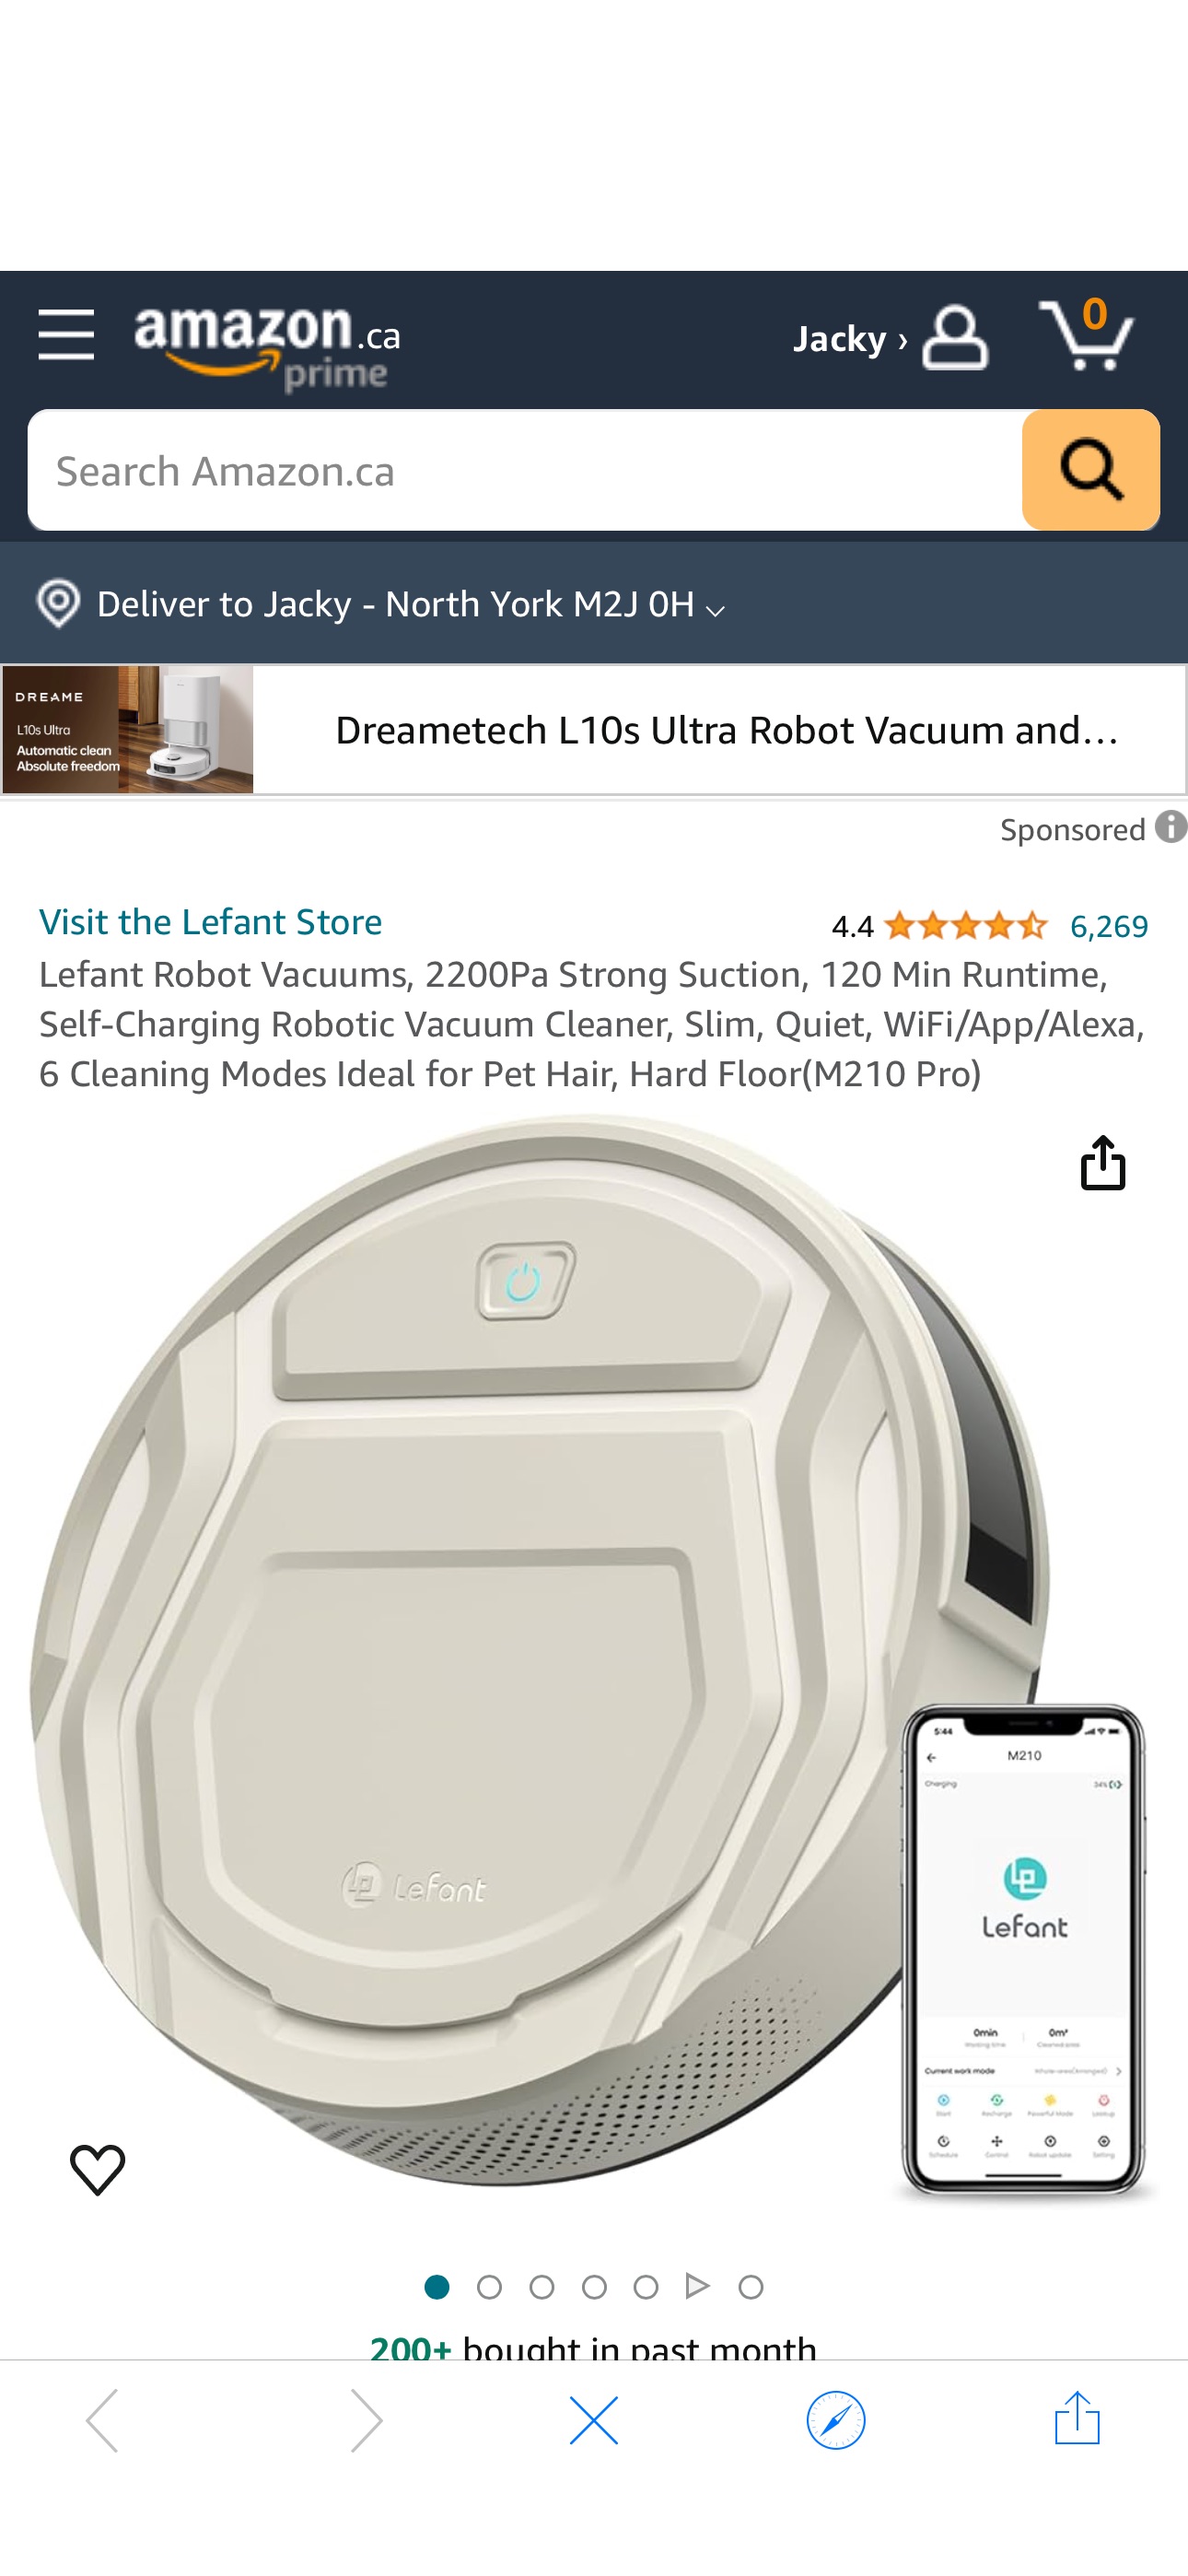 Lefant Robot Vacuums, 2200Pa Strong Suction, 120 Min Runtime, Self-Charging Robotic Vacuum Cleaner, Slim, Quiet, WiFi/App/Alexa, 6 Cleaning Modes Ideal for Pet Hair, Hard Floor(M210 Pro) : Amazon.ca: 